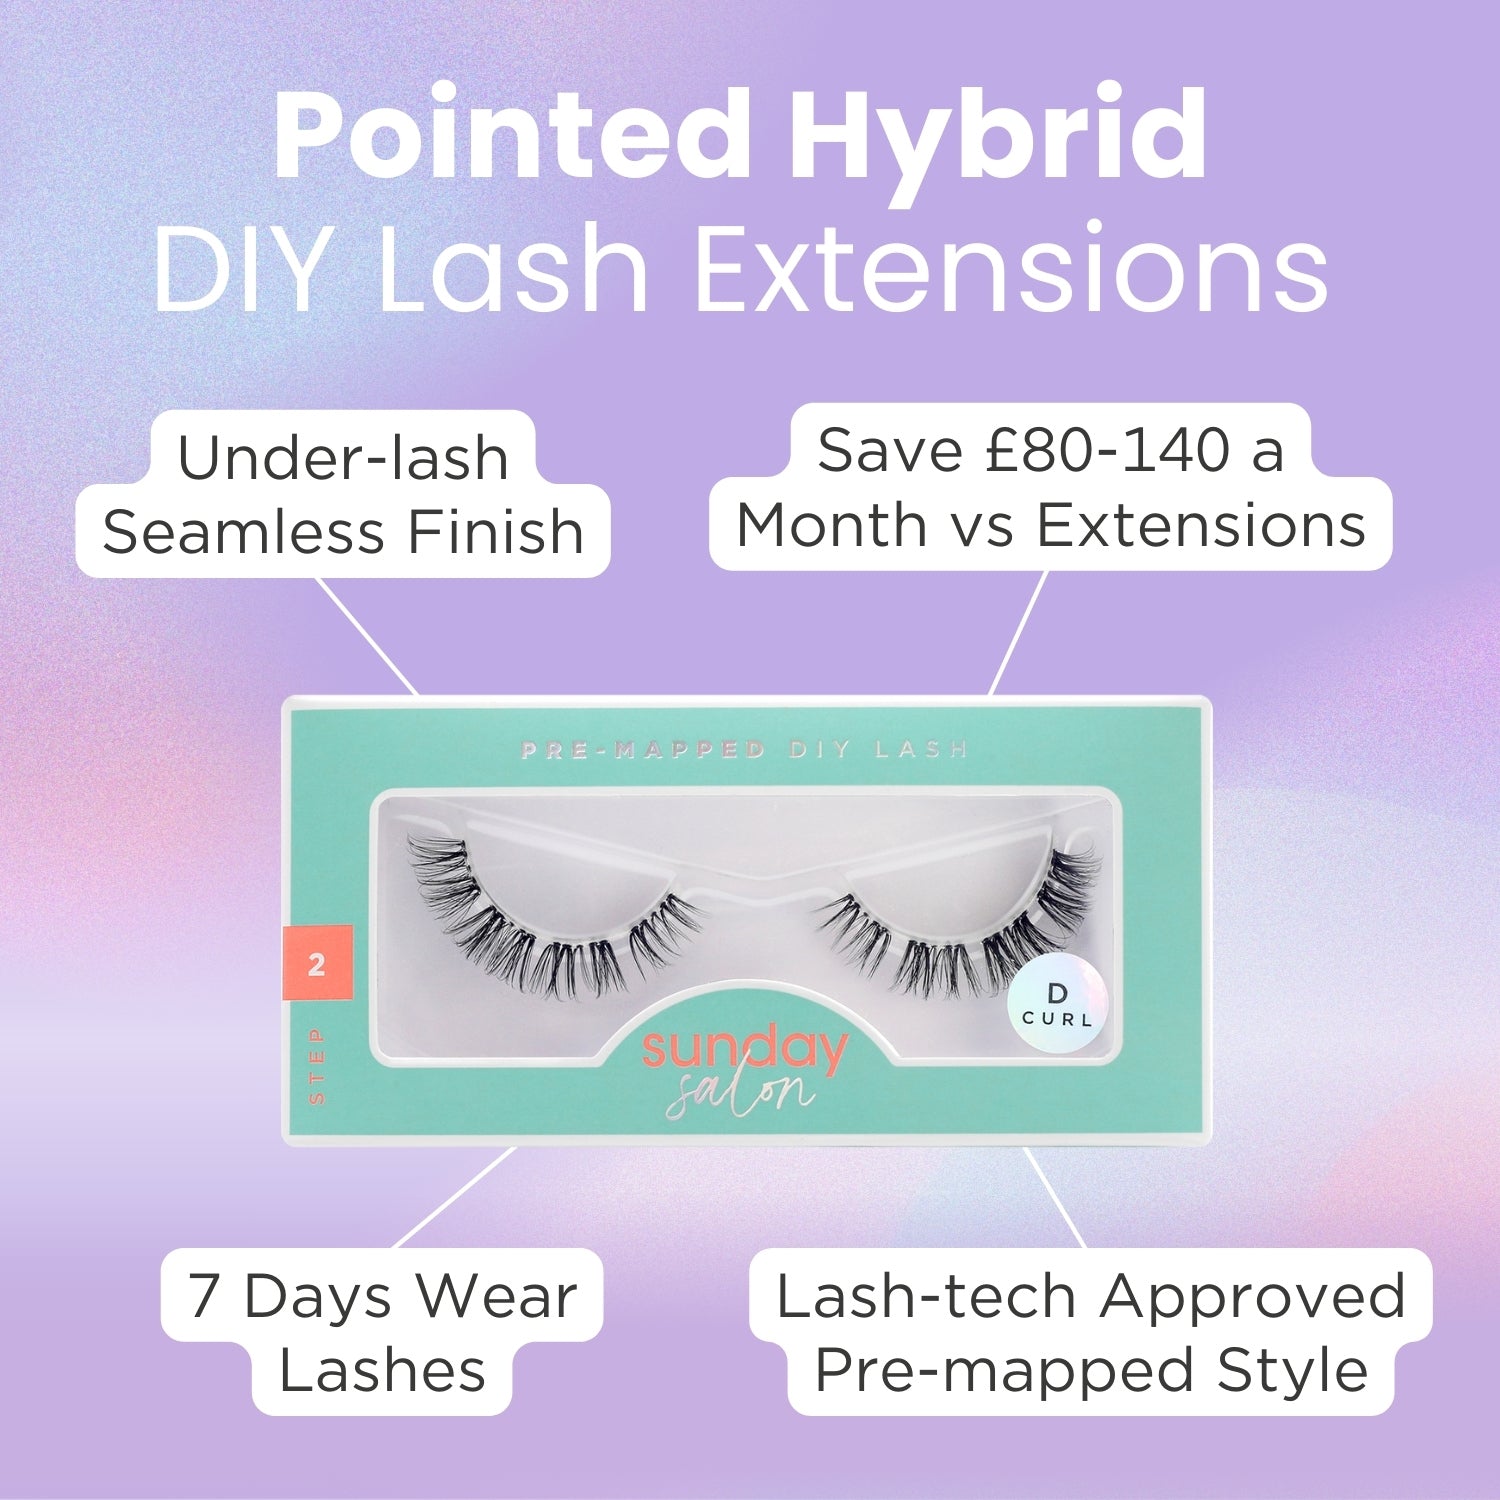 Pointed Hybrid DIY Lash Extensions - Lola's Lashes